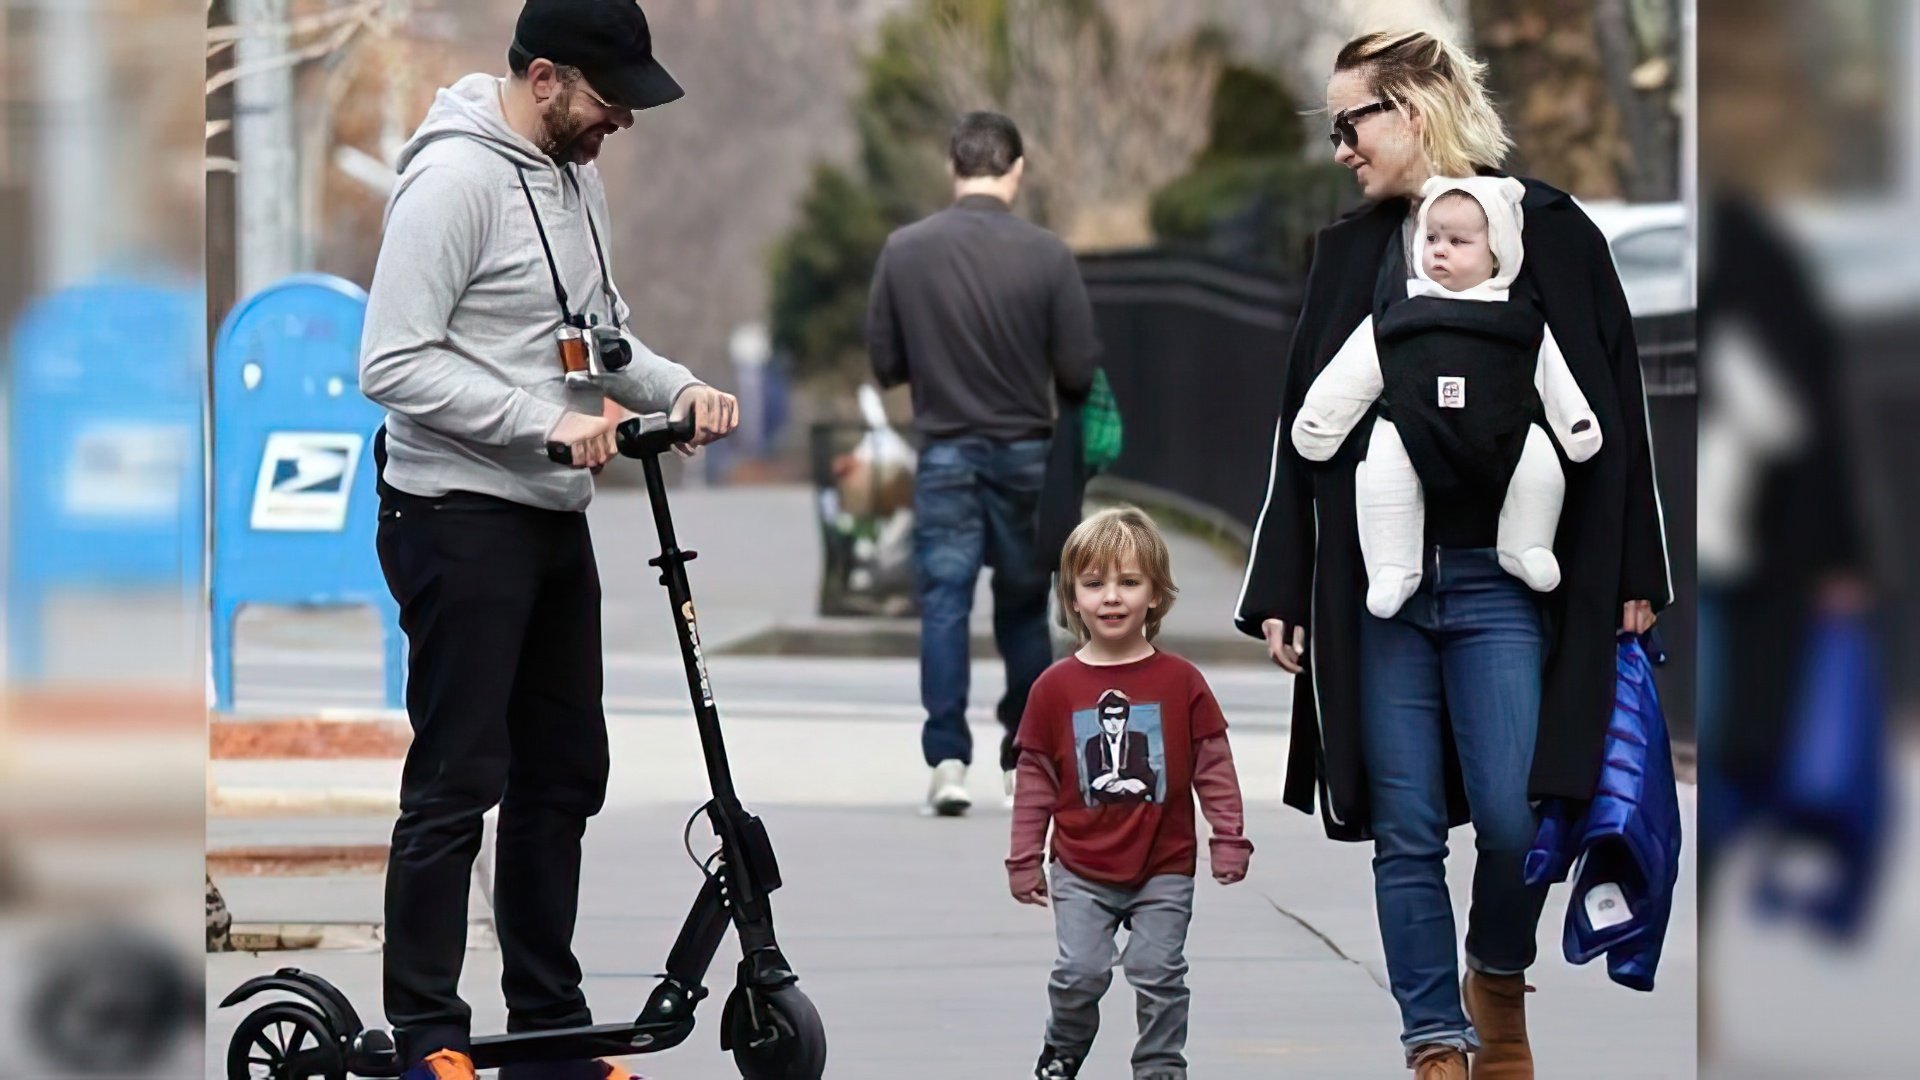 Jason Sudeikis with his former wife and children